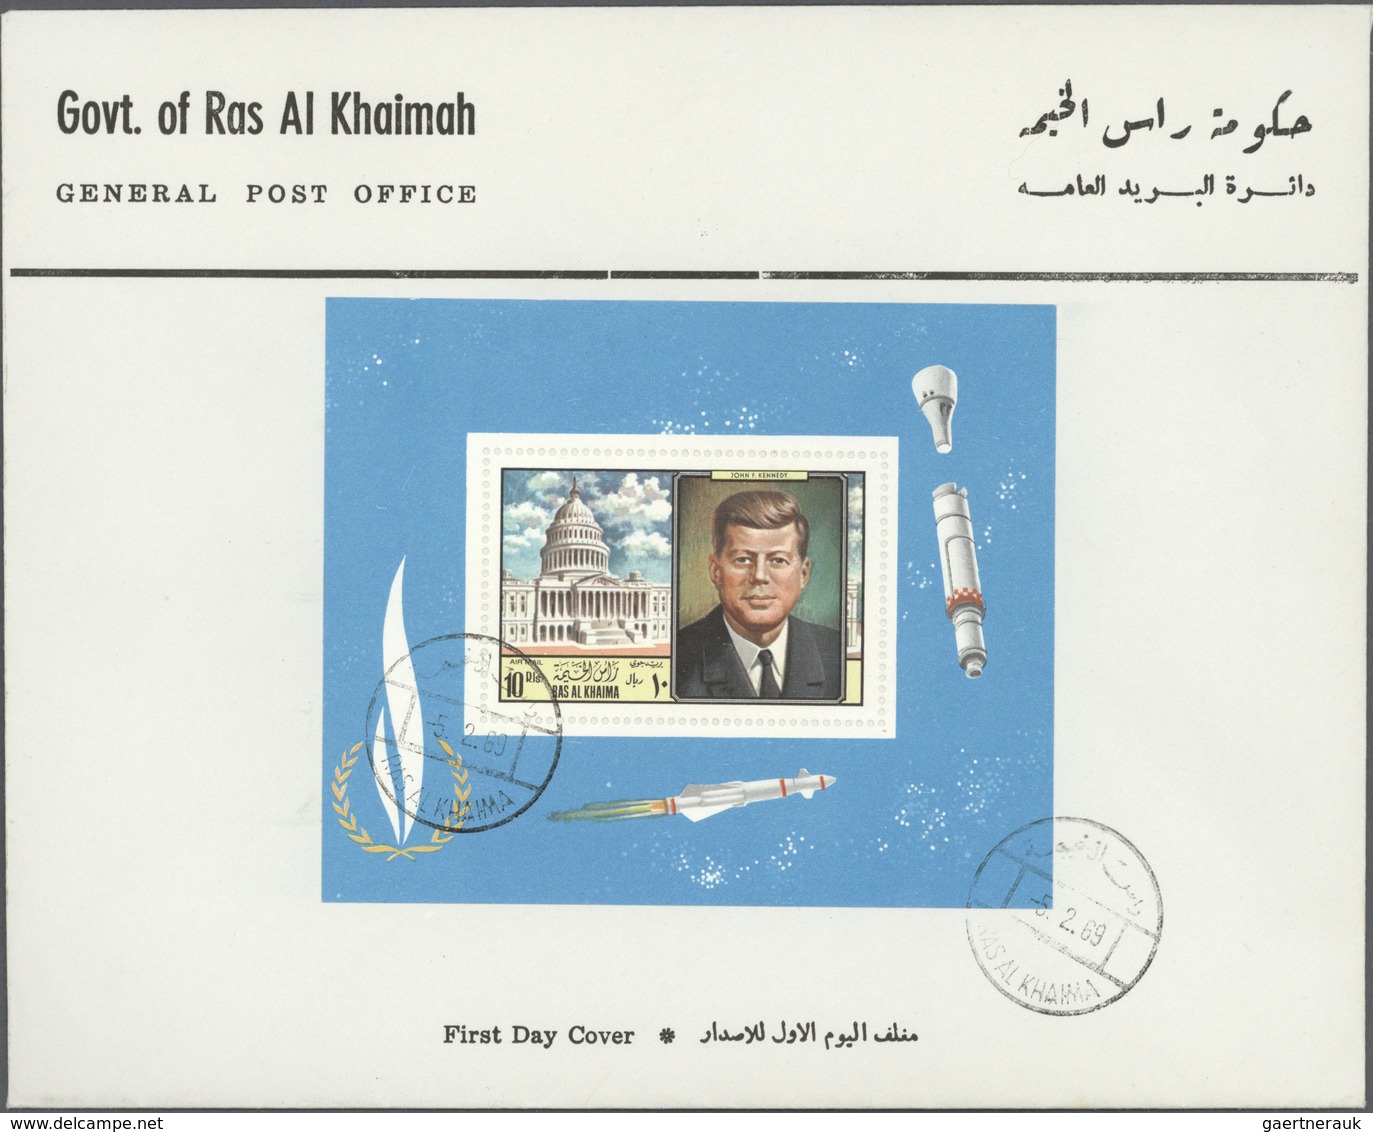 Naher Osten: 1958/1972, Yemen and Ras-al-Khaima, lot of more than 100 covers (mainly unaddressed res